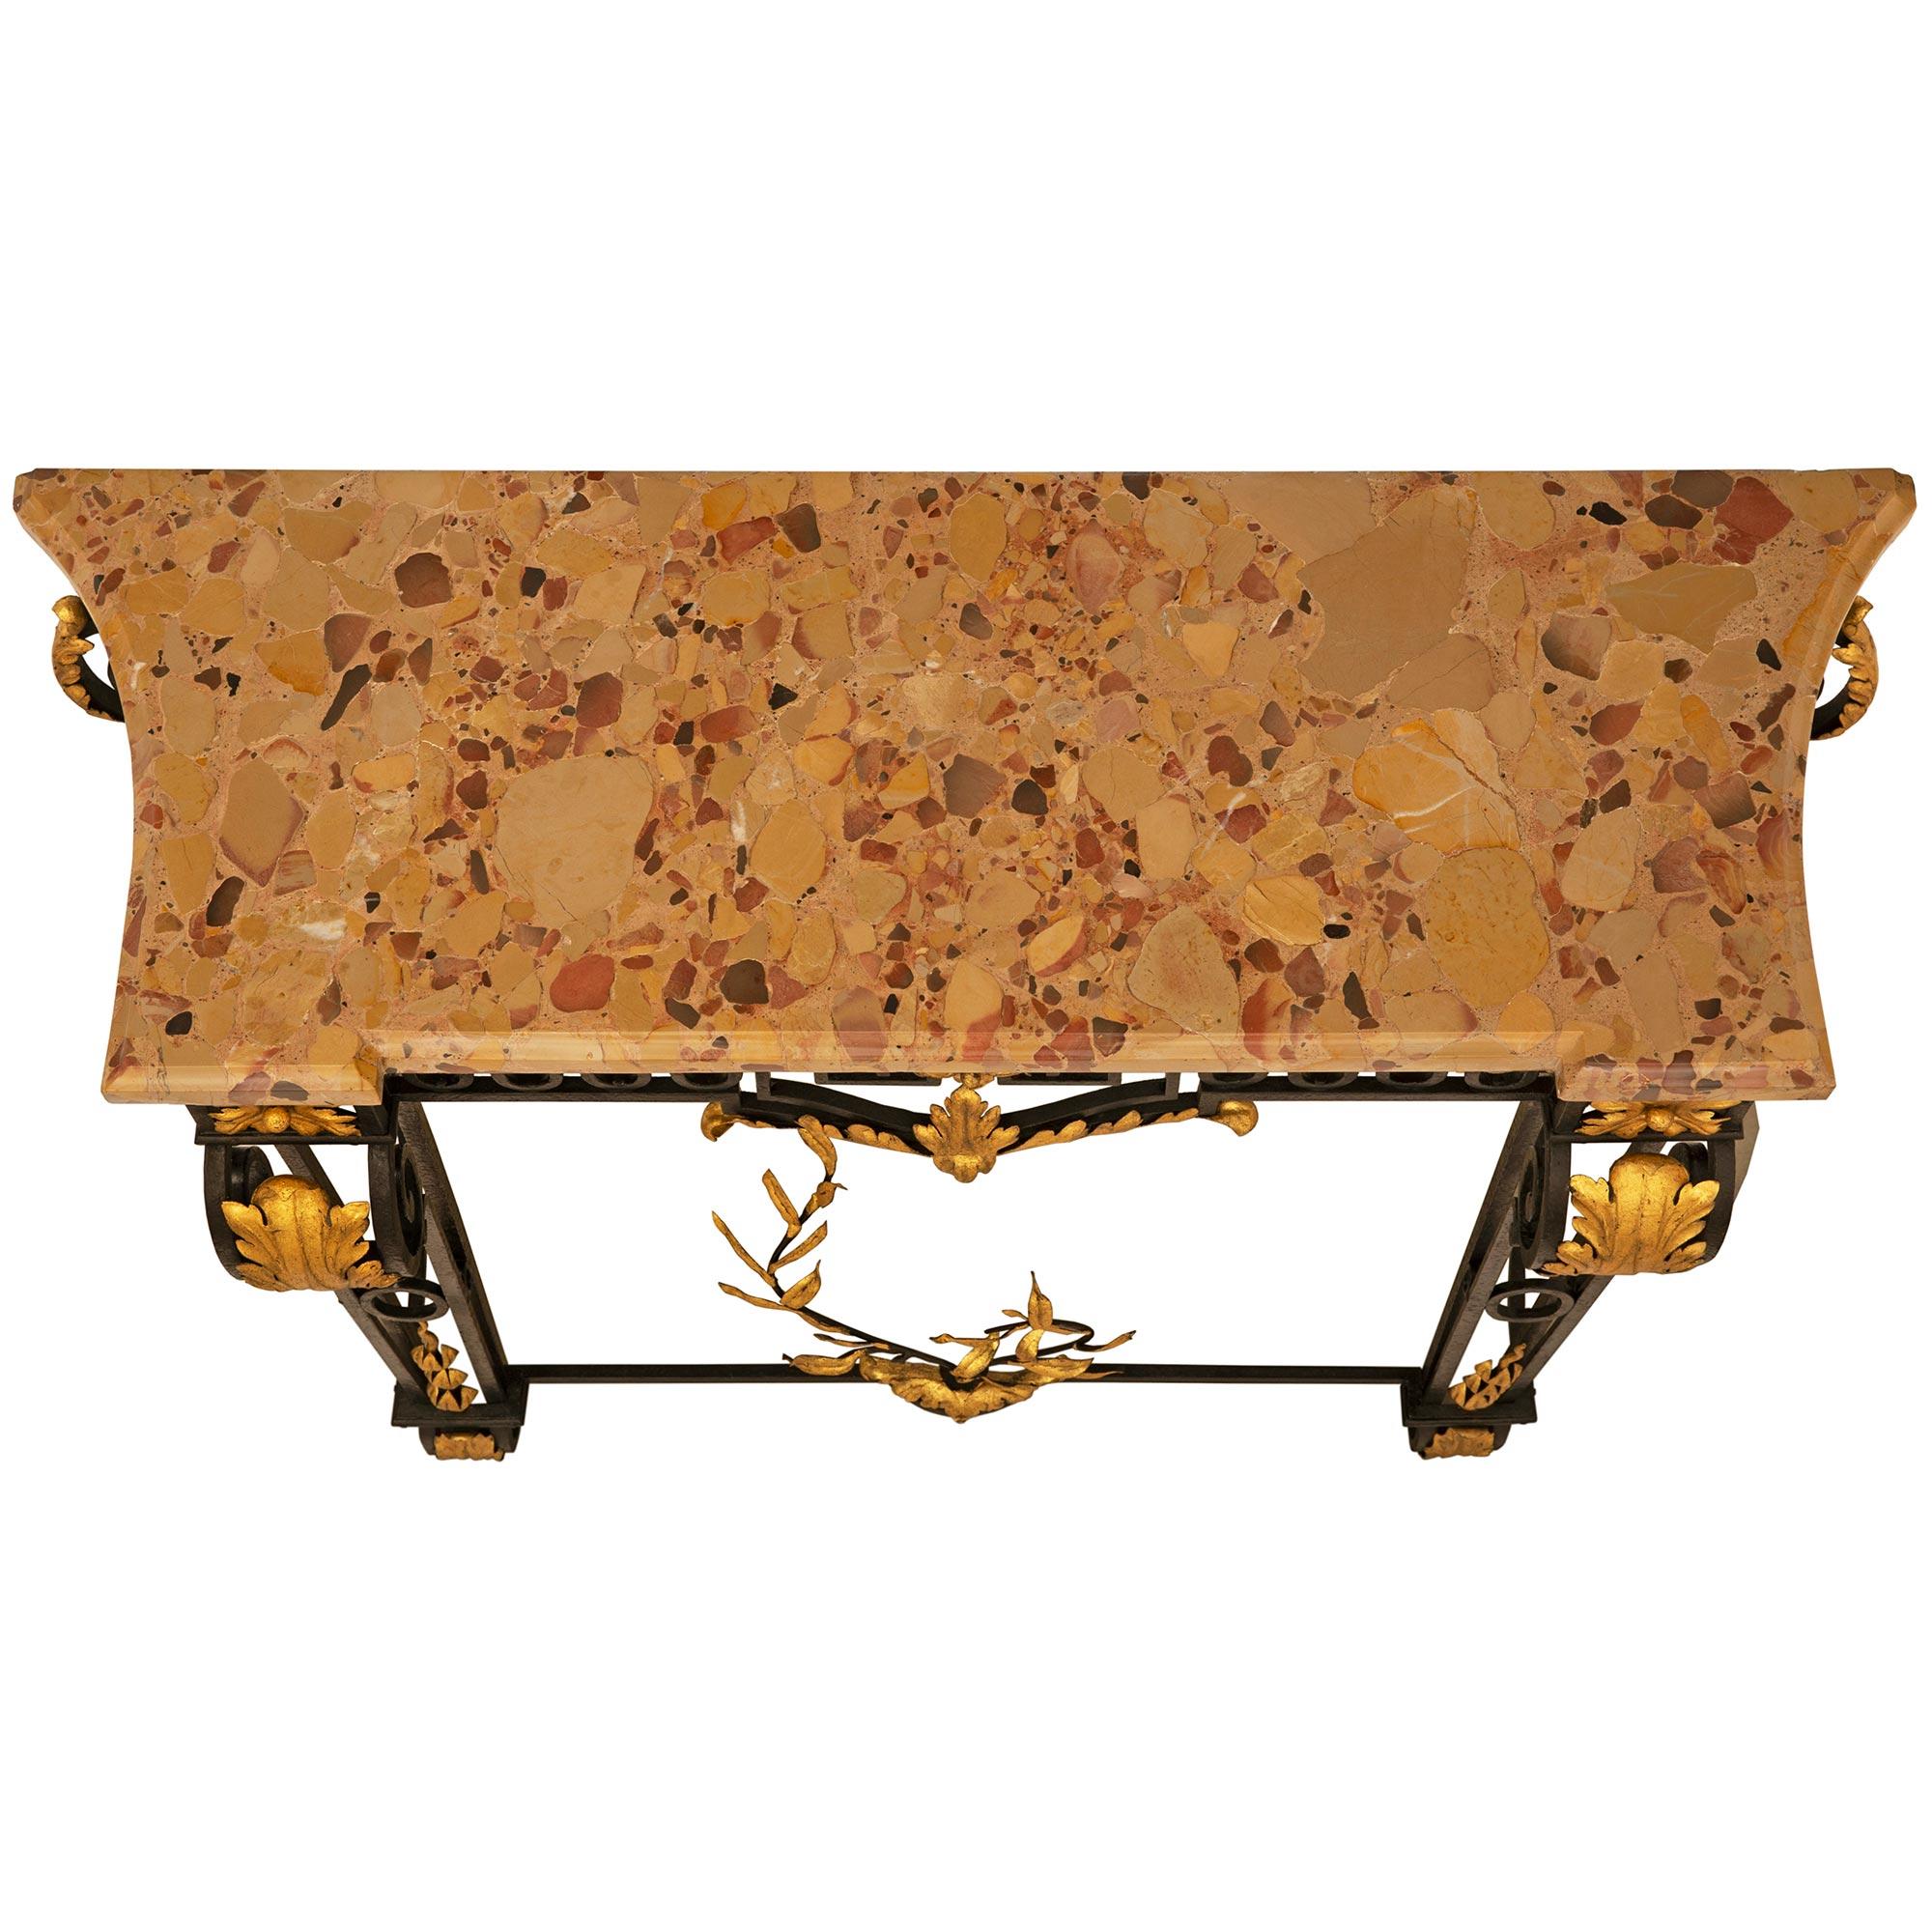 A stunning French 19th century Louis XVI st. Wrought Iron, Gilt Metal and Brèche d'Alep marble console. This freestanding console is raised by four elegant pierced scrolled Wrought Iron supports with scrolled Wrought Iron feet and overlapping Gilt